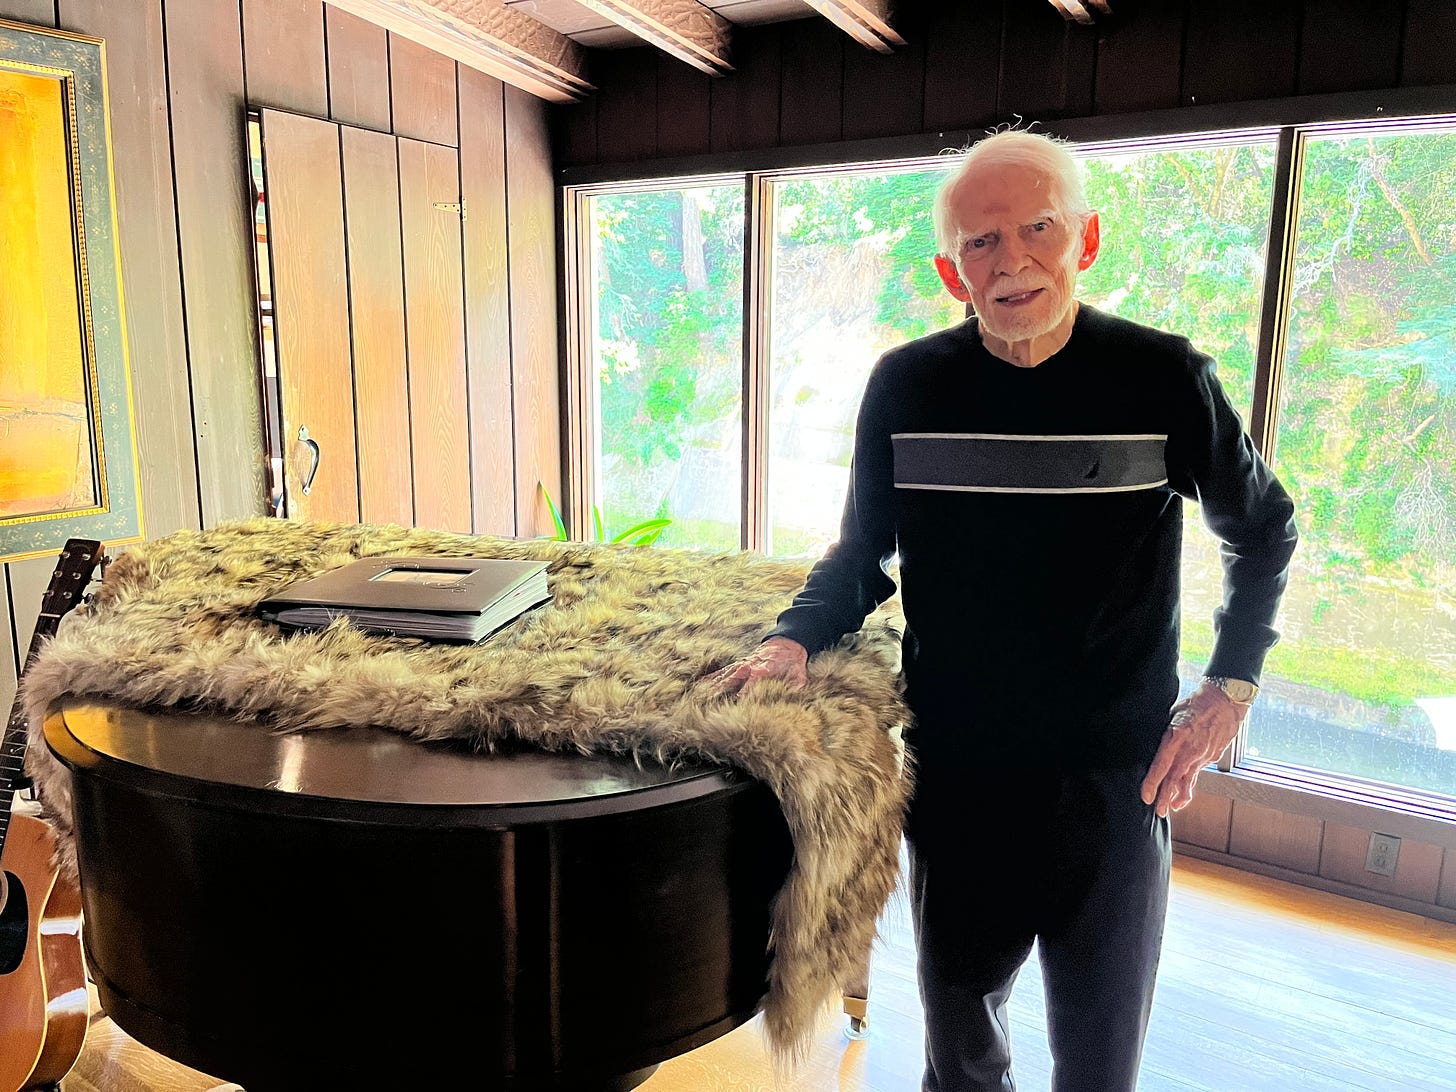 Elderly man with black and white track suit stands in front of piano. The room is paneled wood. Floor to ceiling windows show greenery. A guitar rests on the floor near the piano. The piano has a blanket lying over its top.